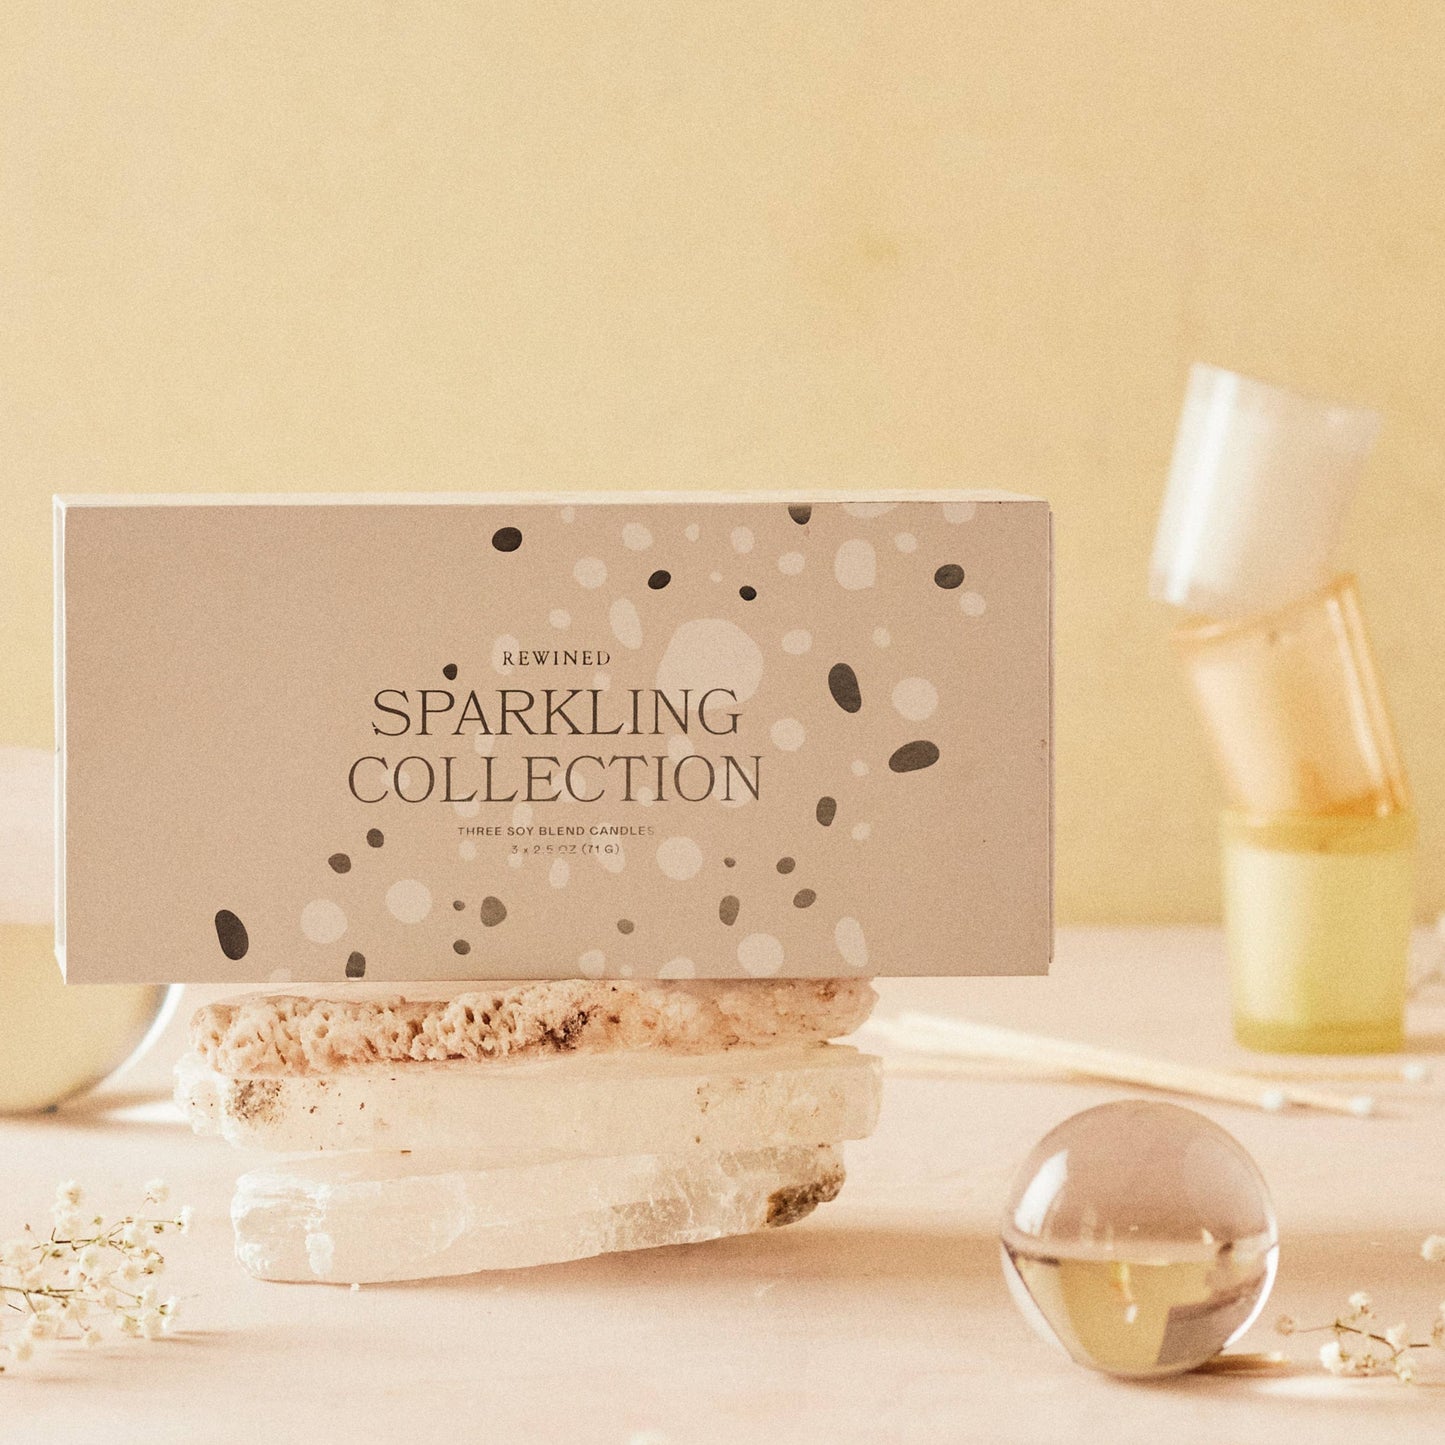 Rewined Sparkling Candle Gift Set